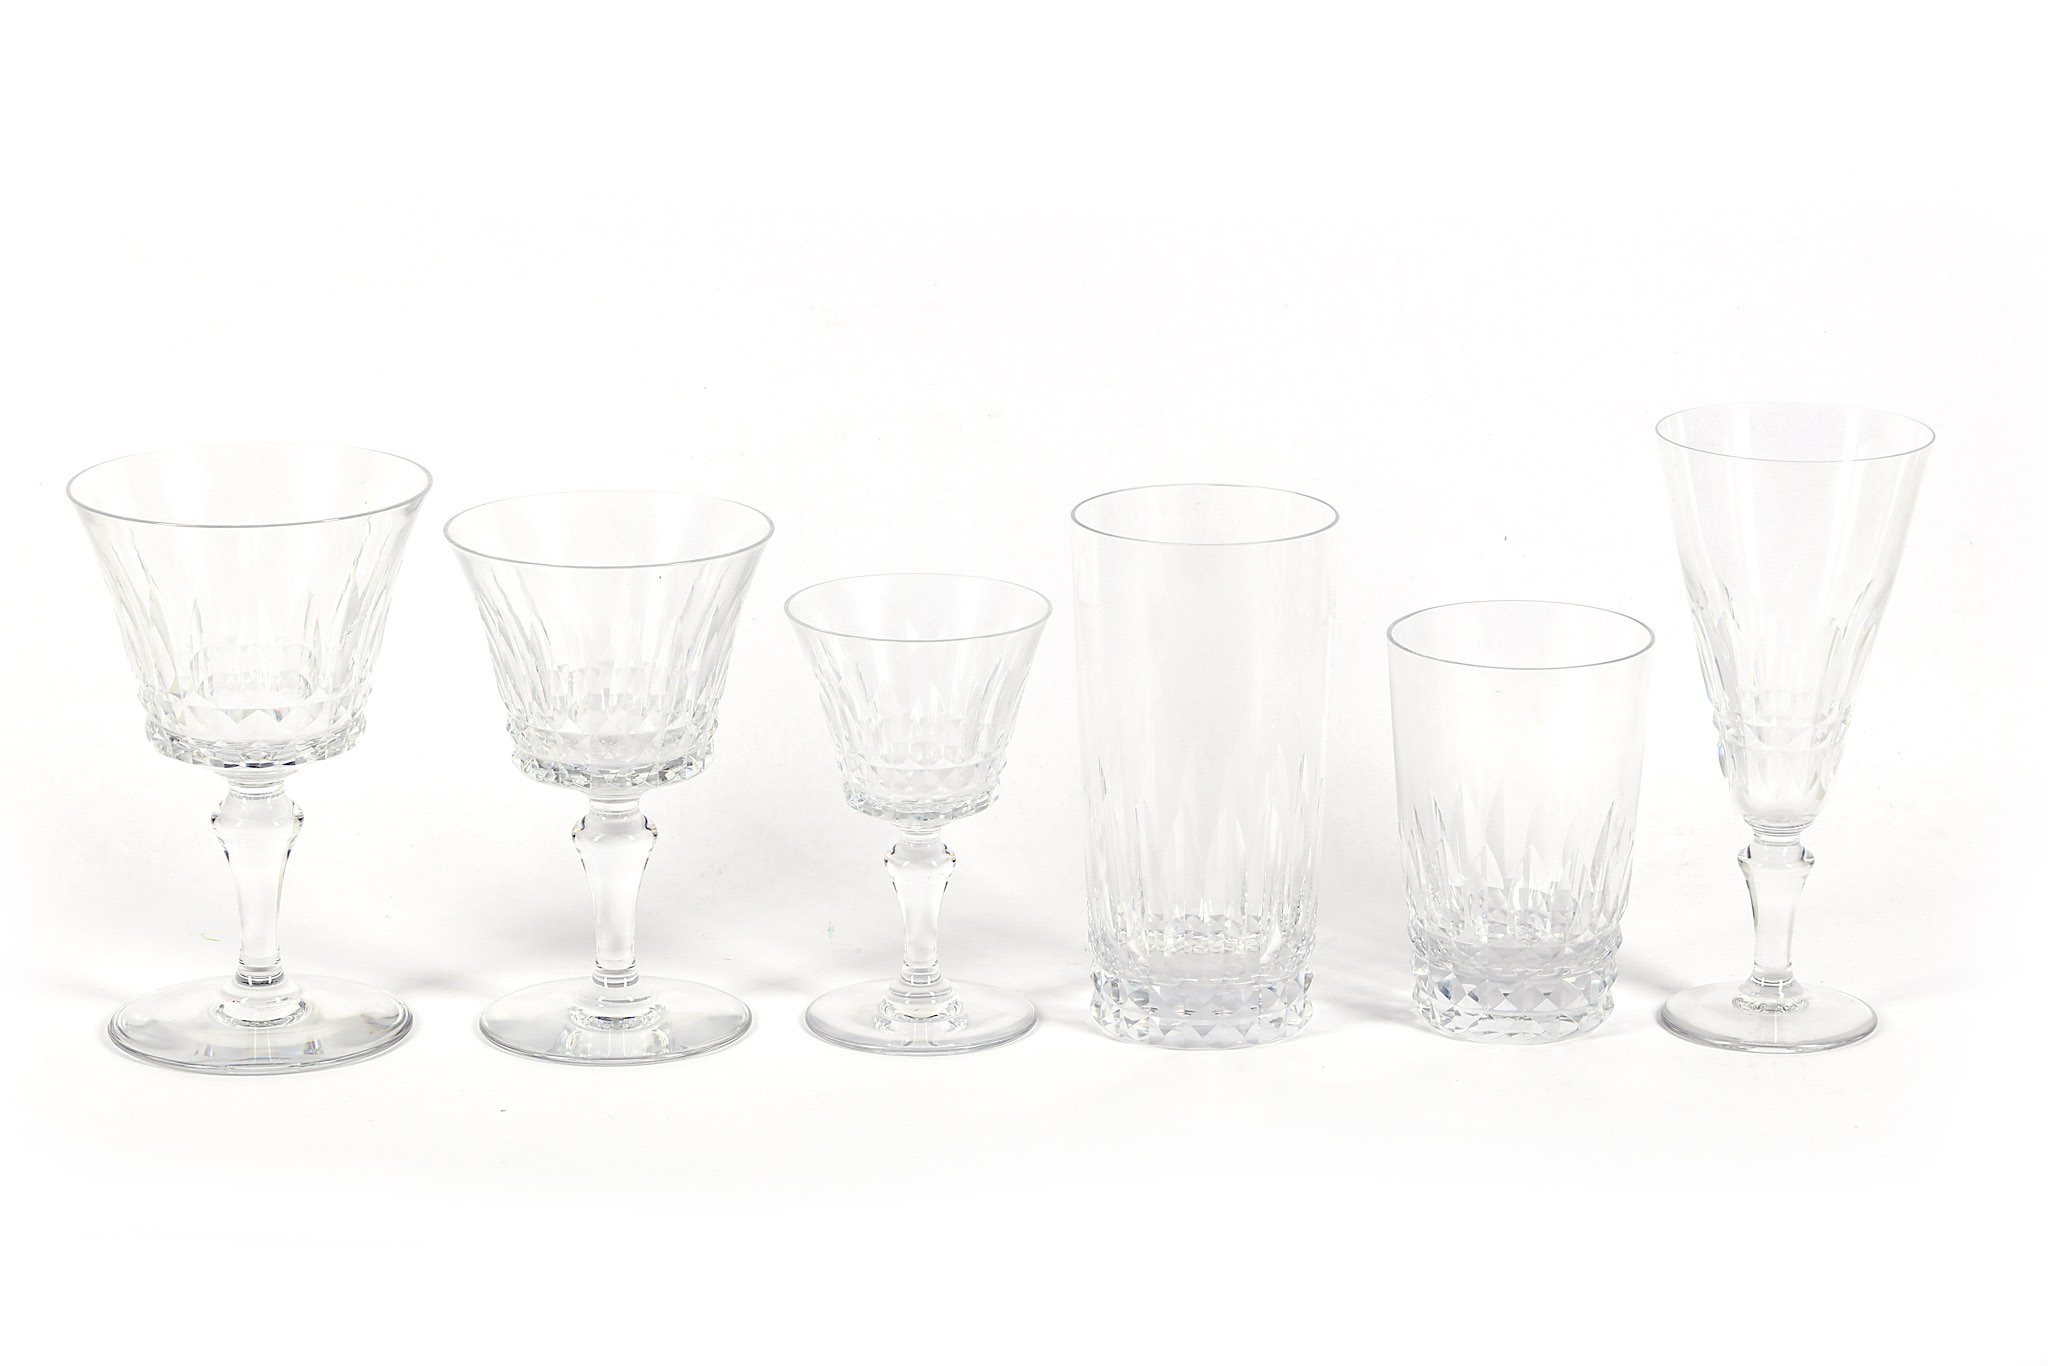 An extensive suite of Baccarat cut crystal glasswa